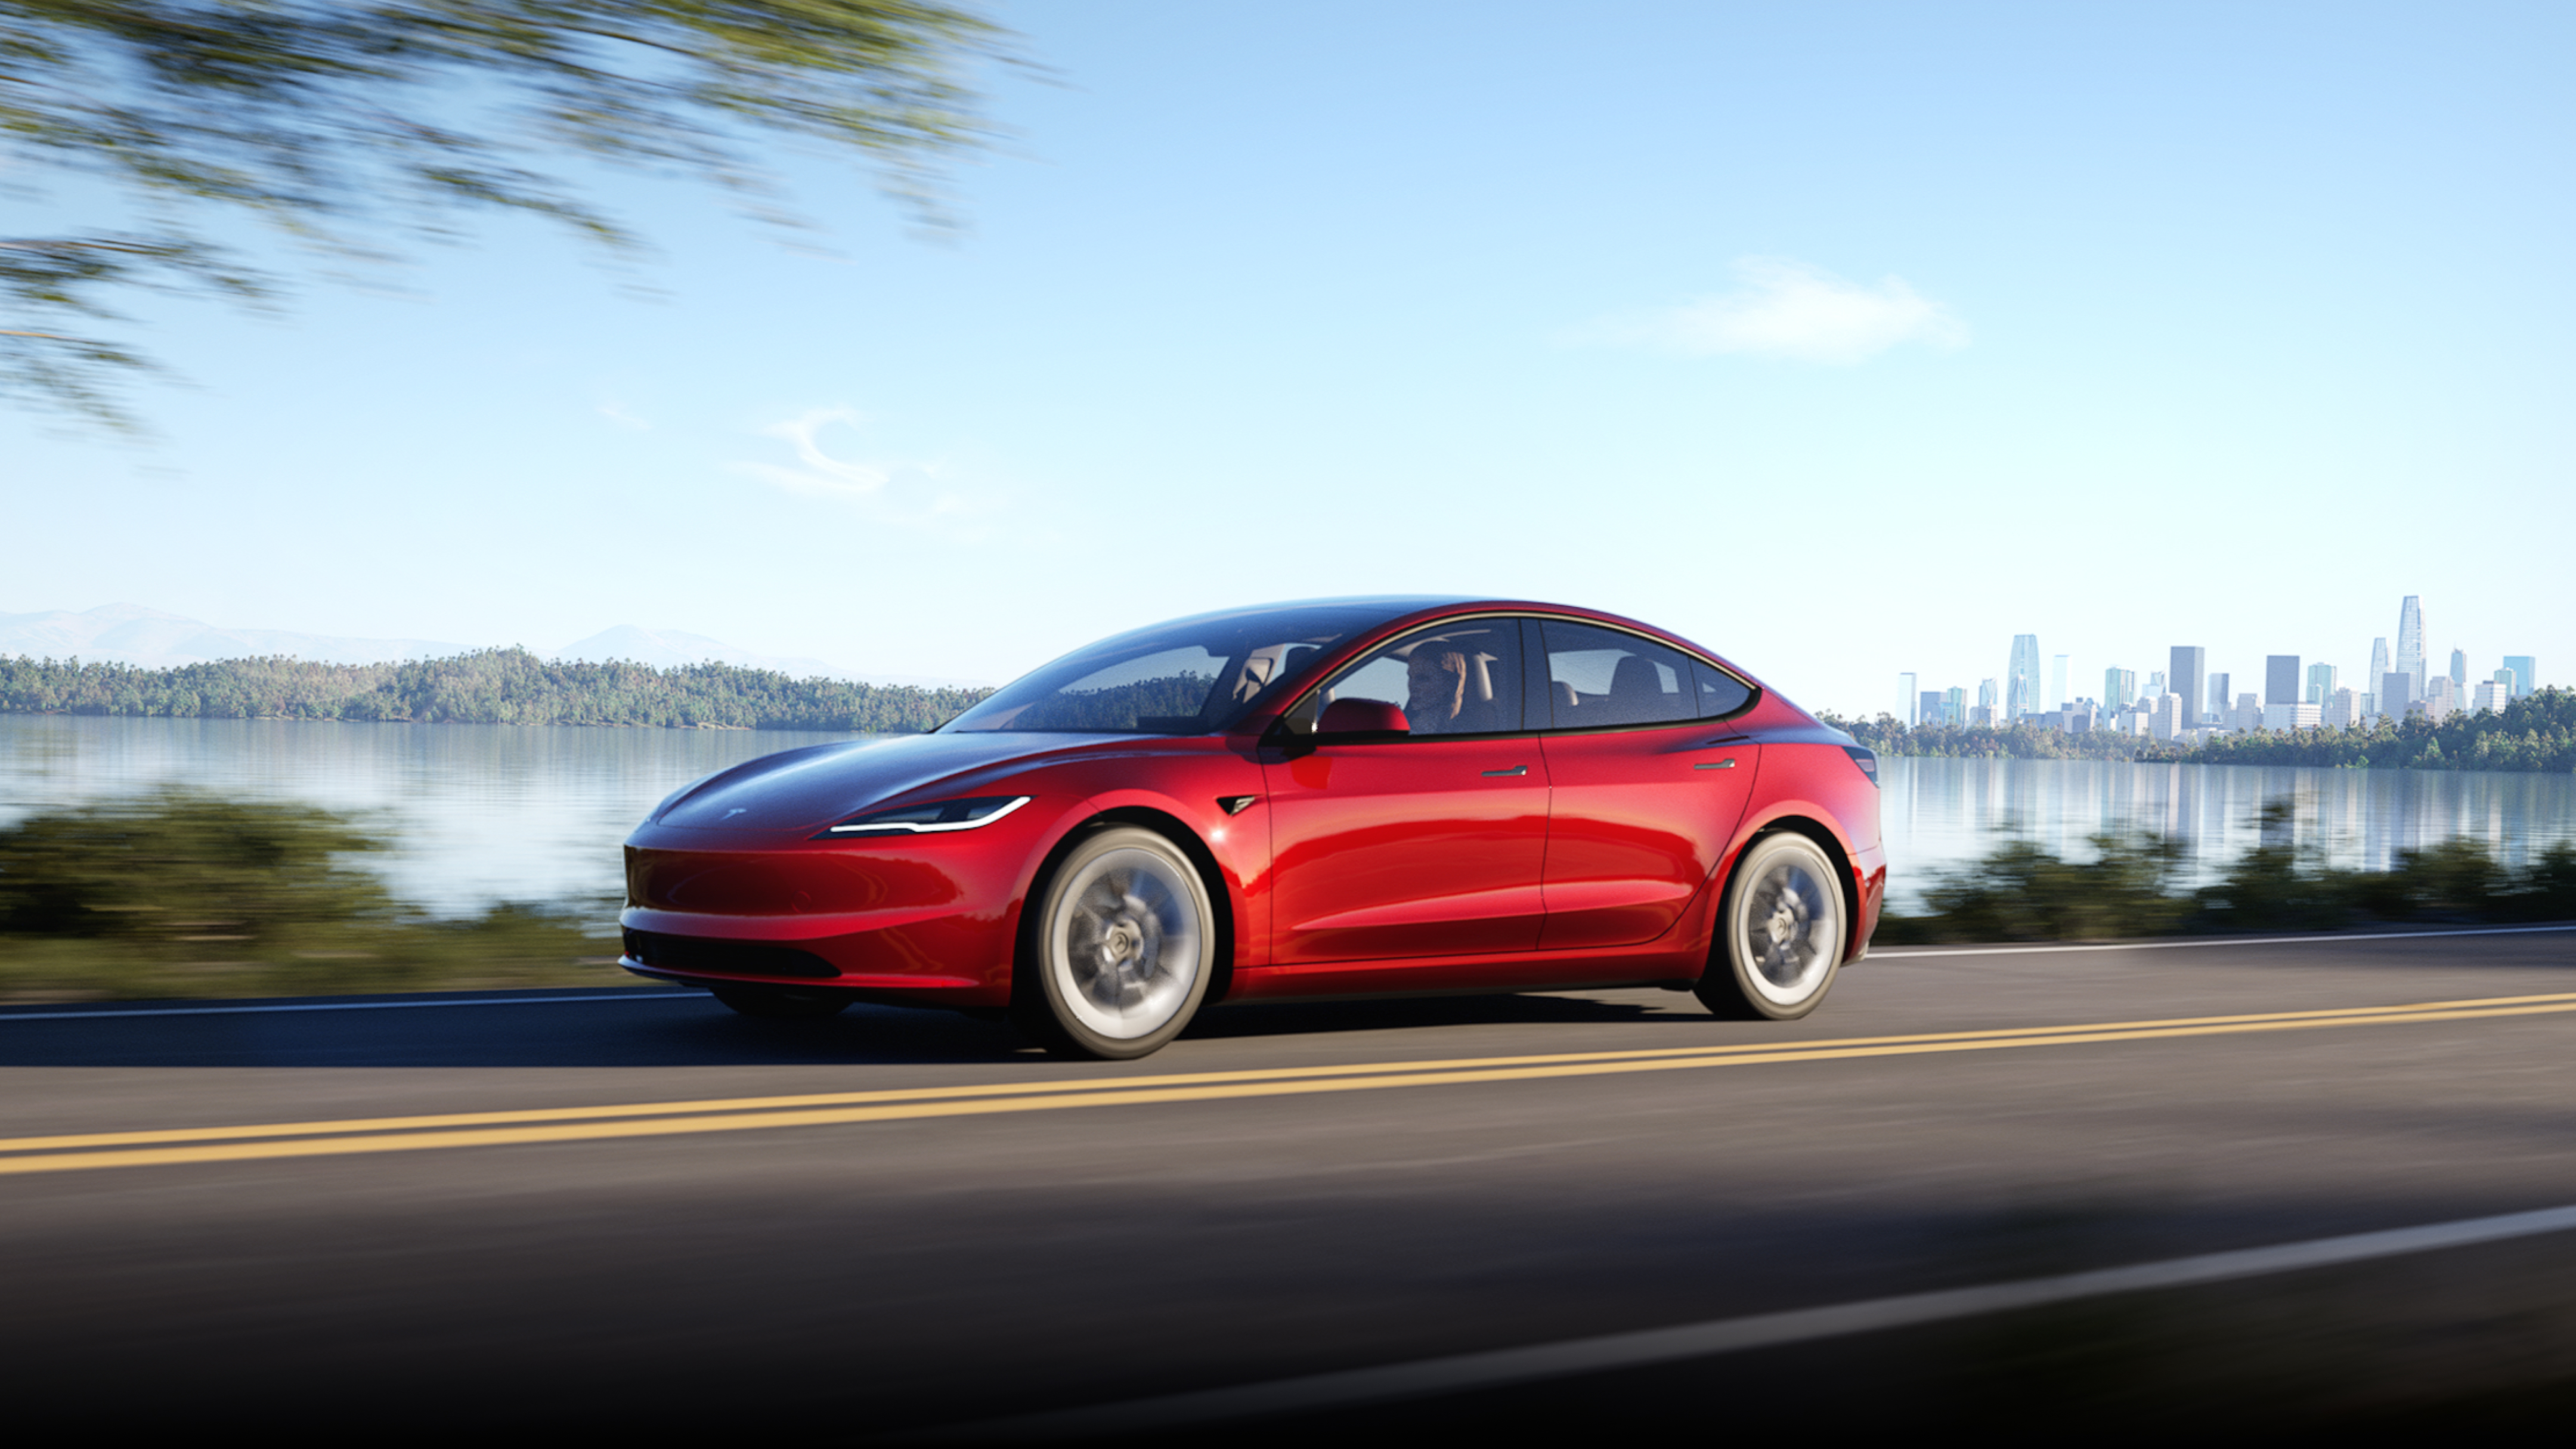 Ultra Red Model 3 roaming down a road with cityscape in the background.